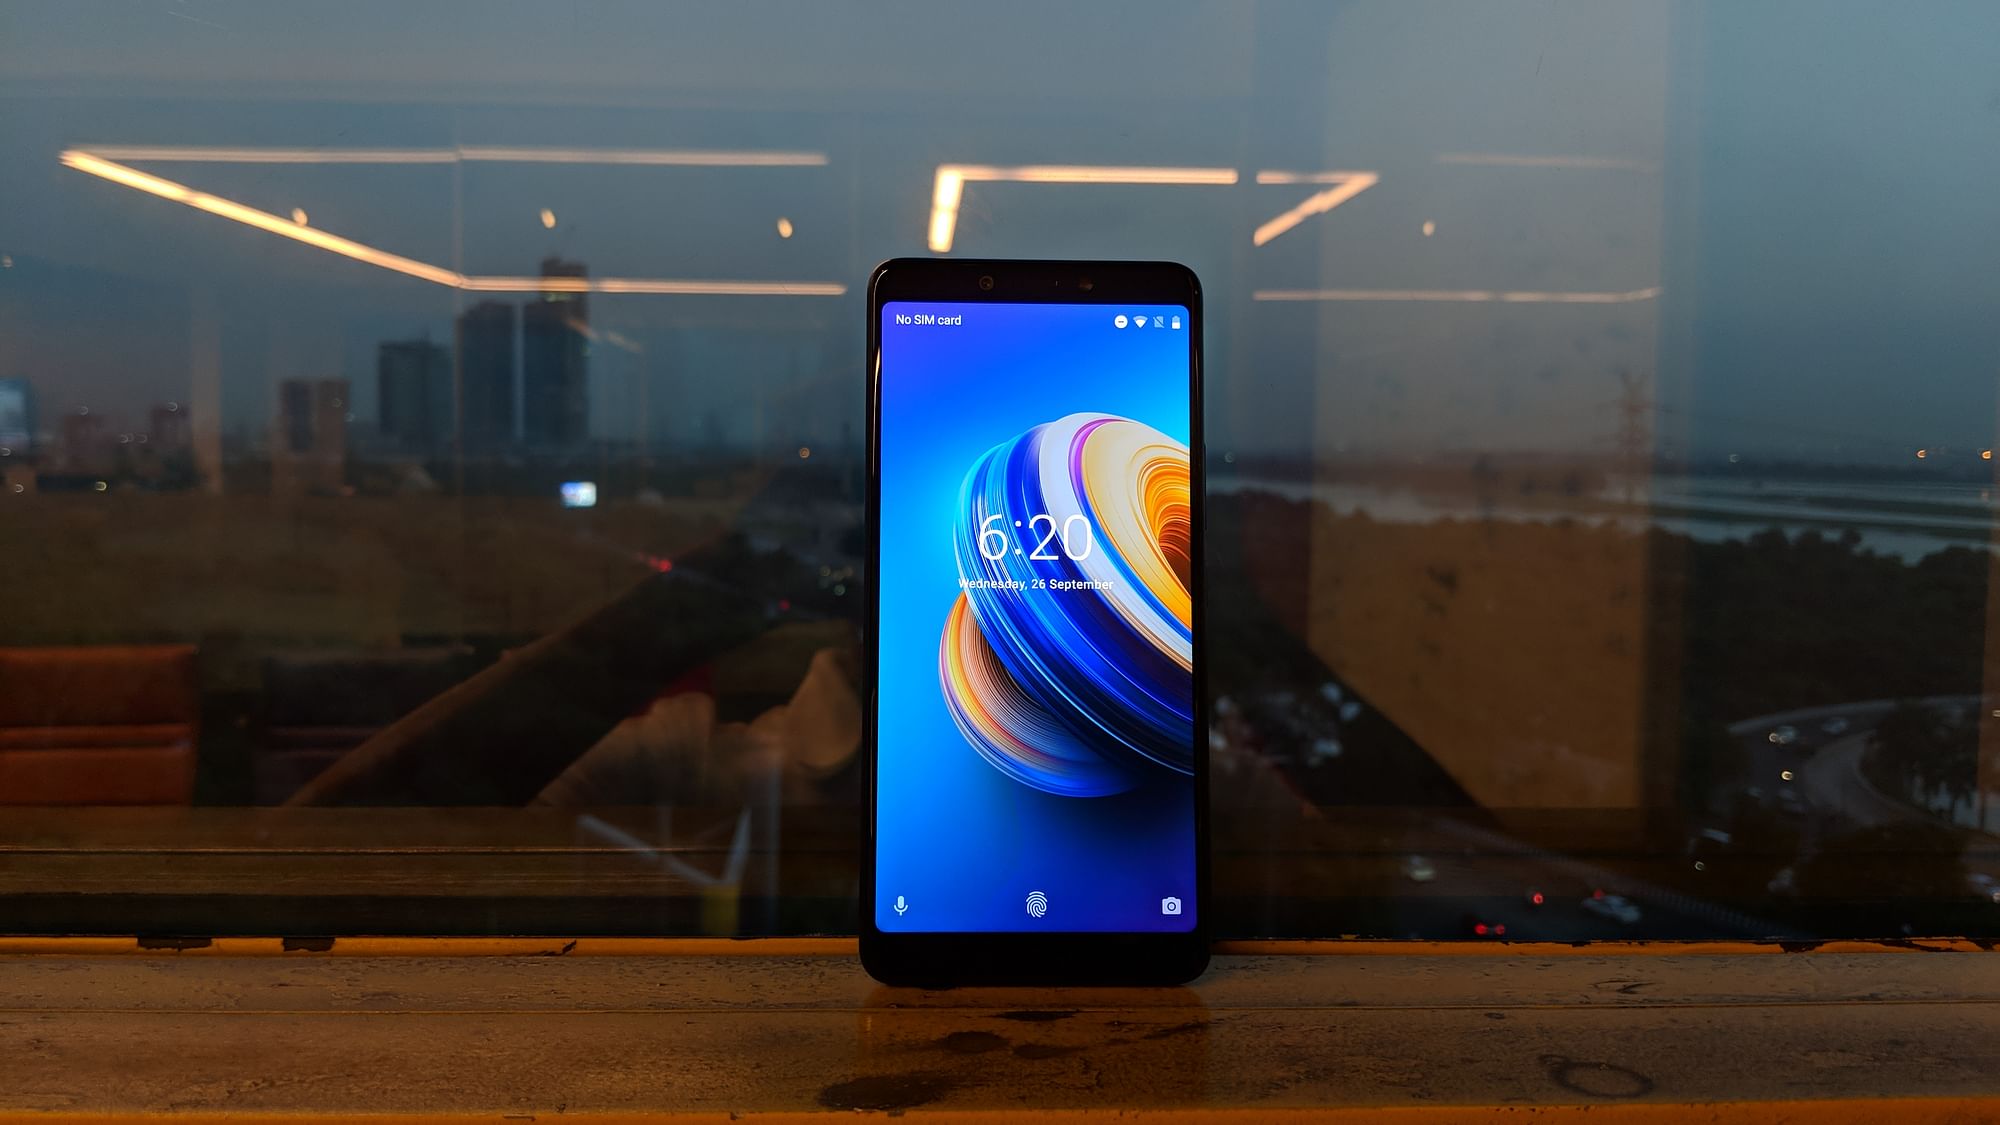 The Infinix Note 5 has one of the best display’s in a sub-10k phone.